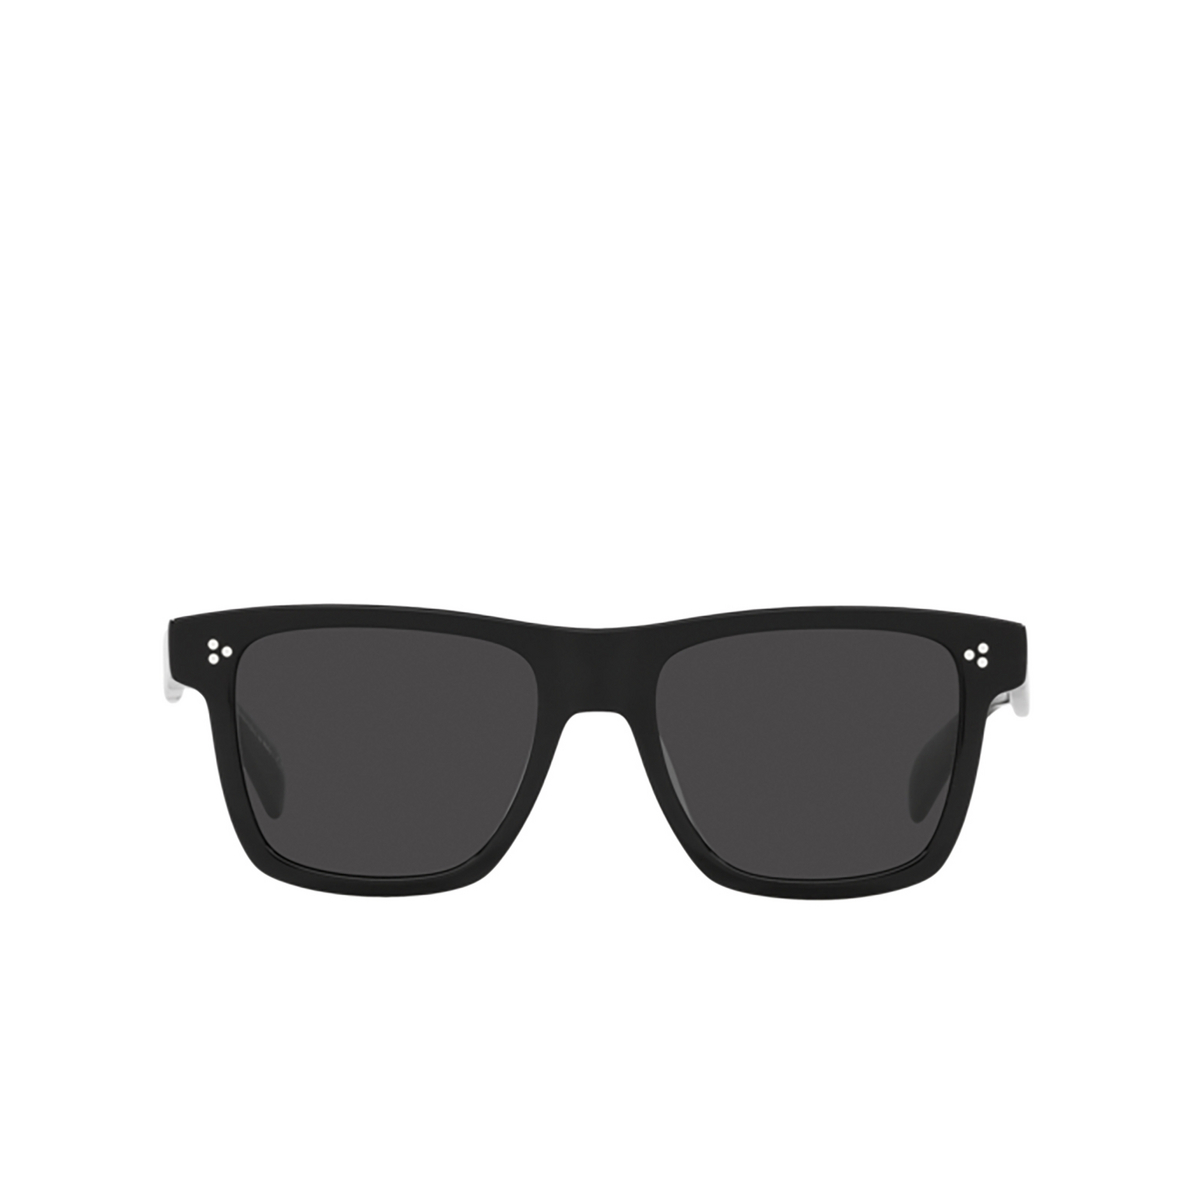 Oliver Peoples CASIAN Sunglasses 100587 Black - front view